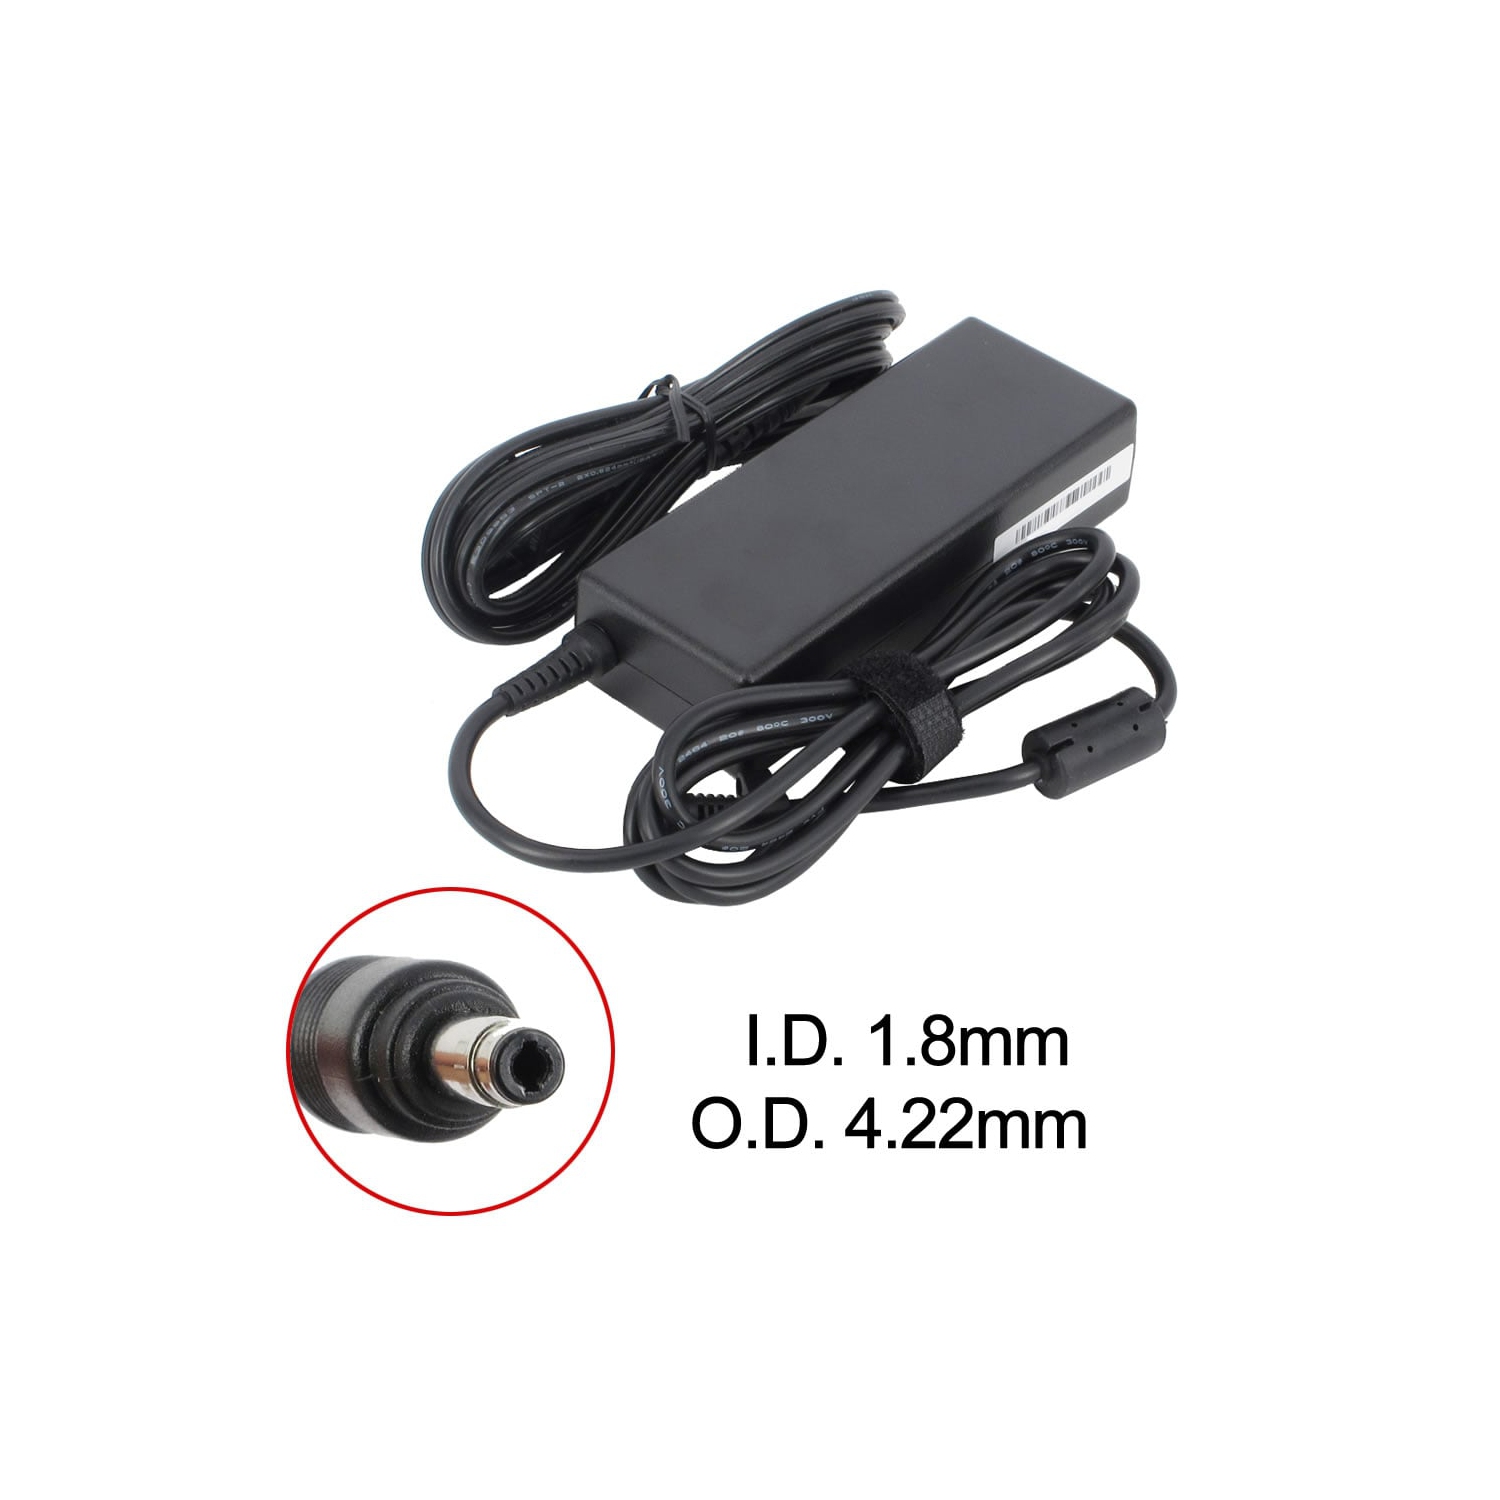 BATTDEPOT New Laptop AC Adapter for Asus X451CA 04G2660031T2